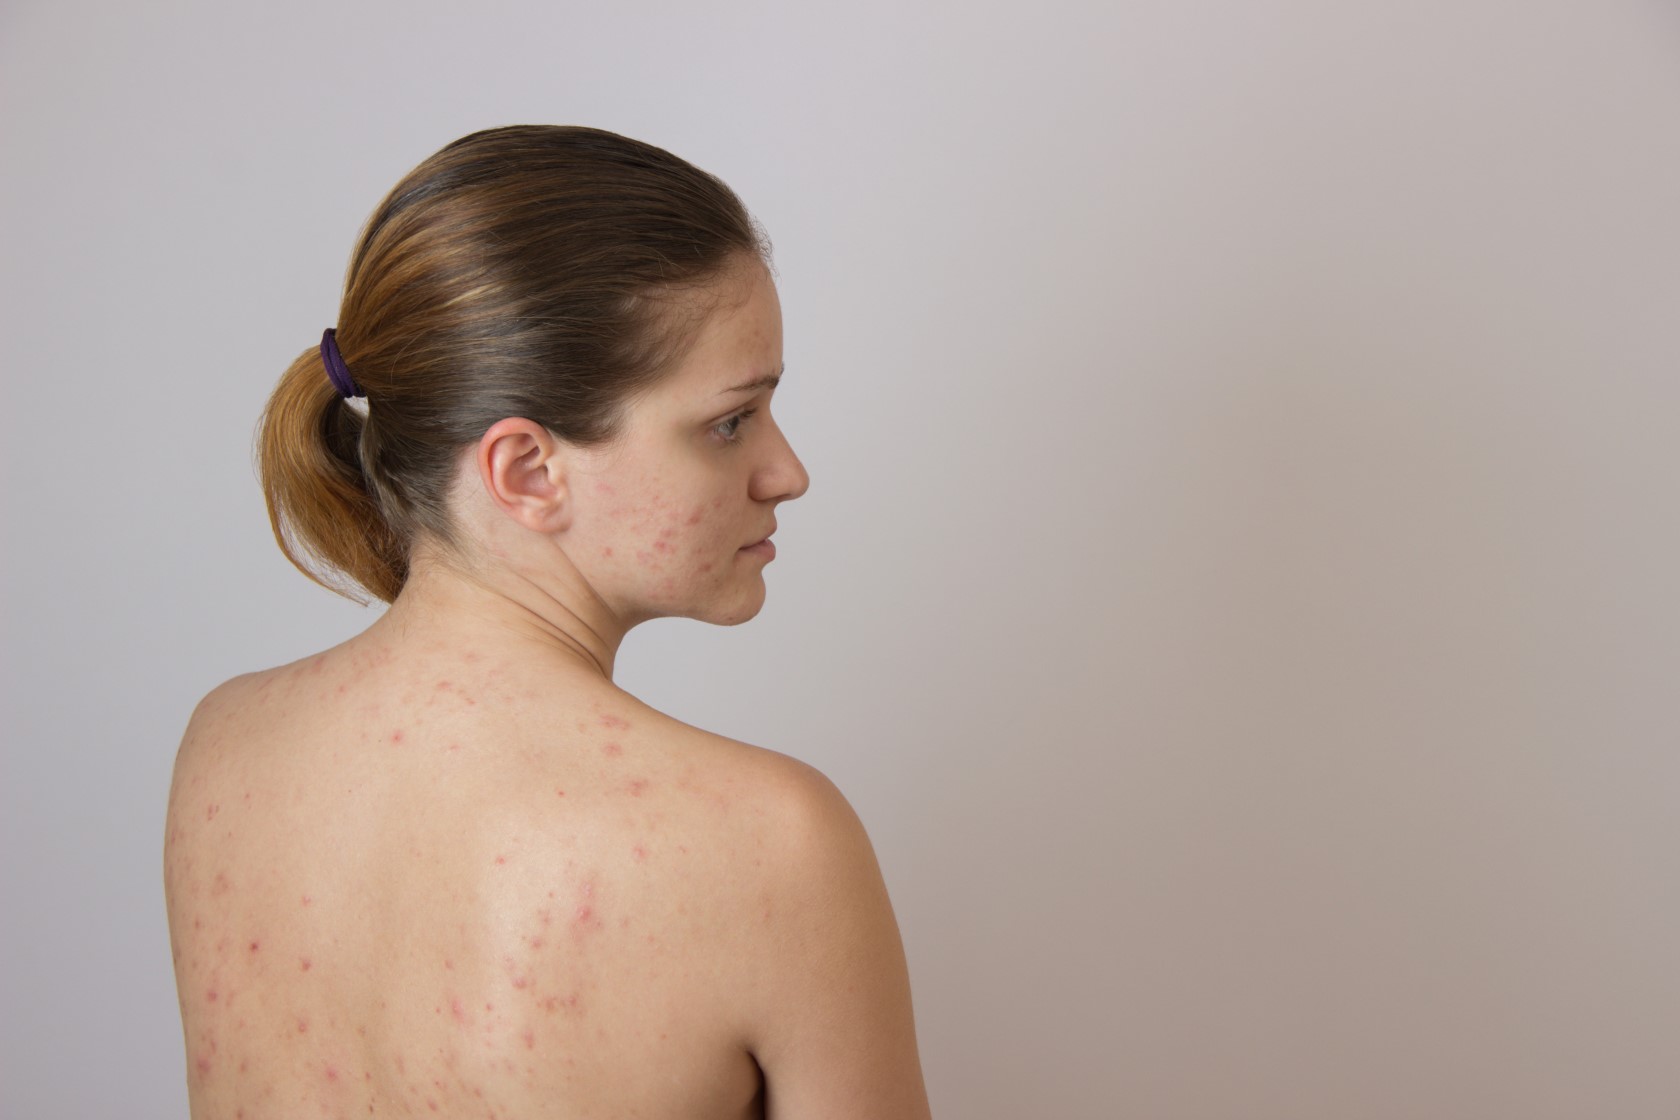 4 Solutions for Hormonal Acne That Really Work